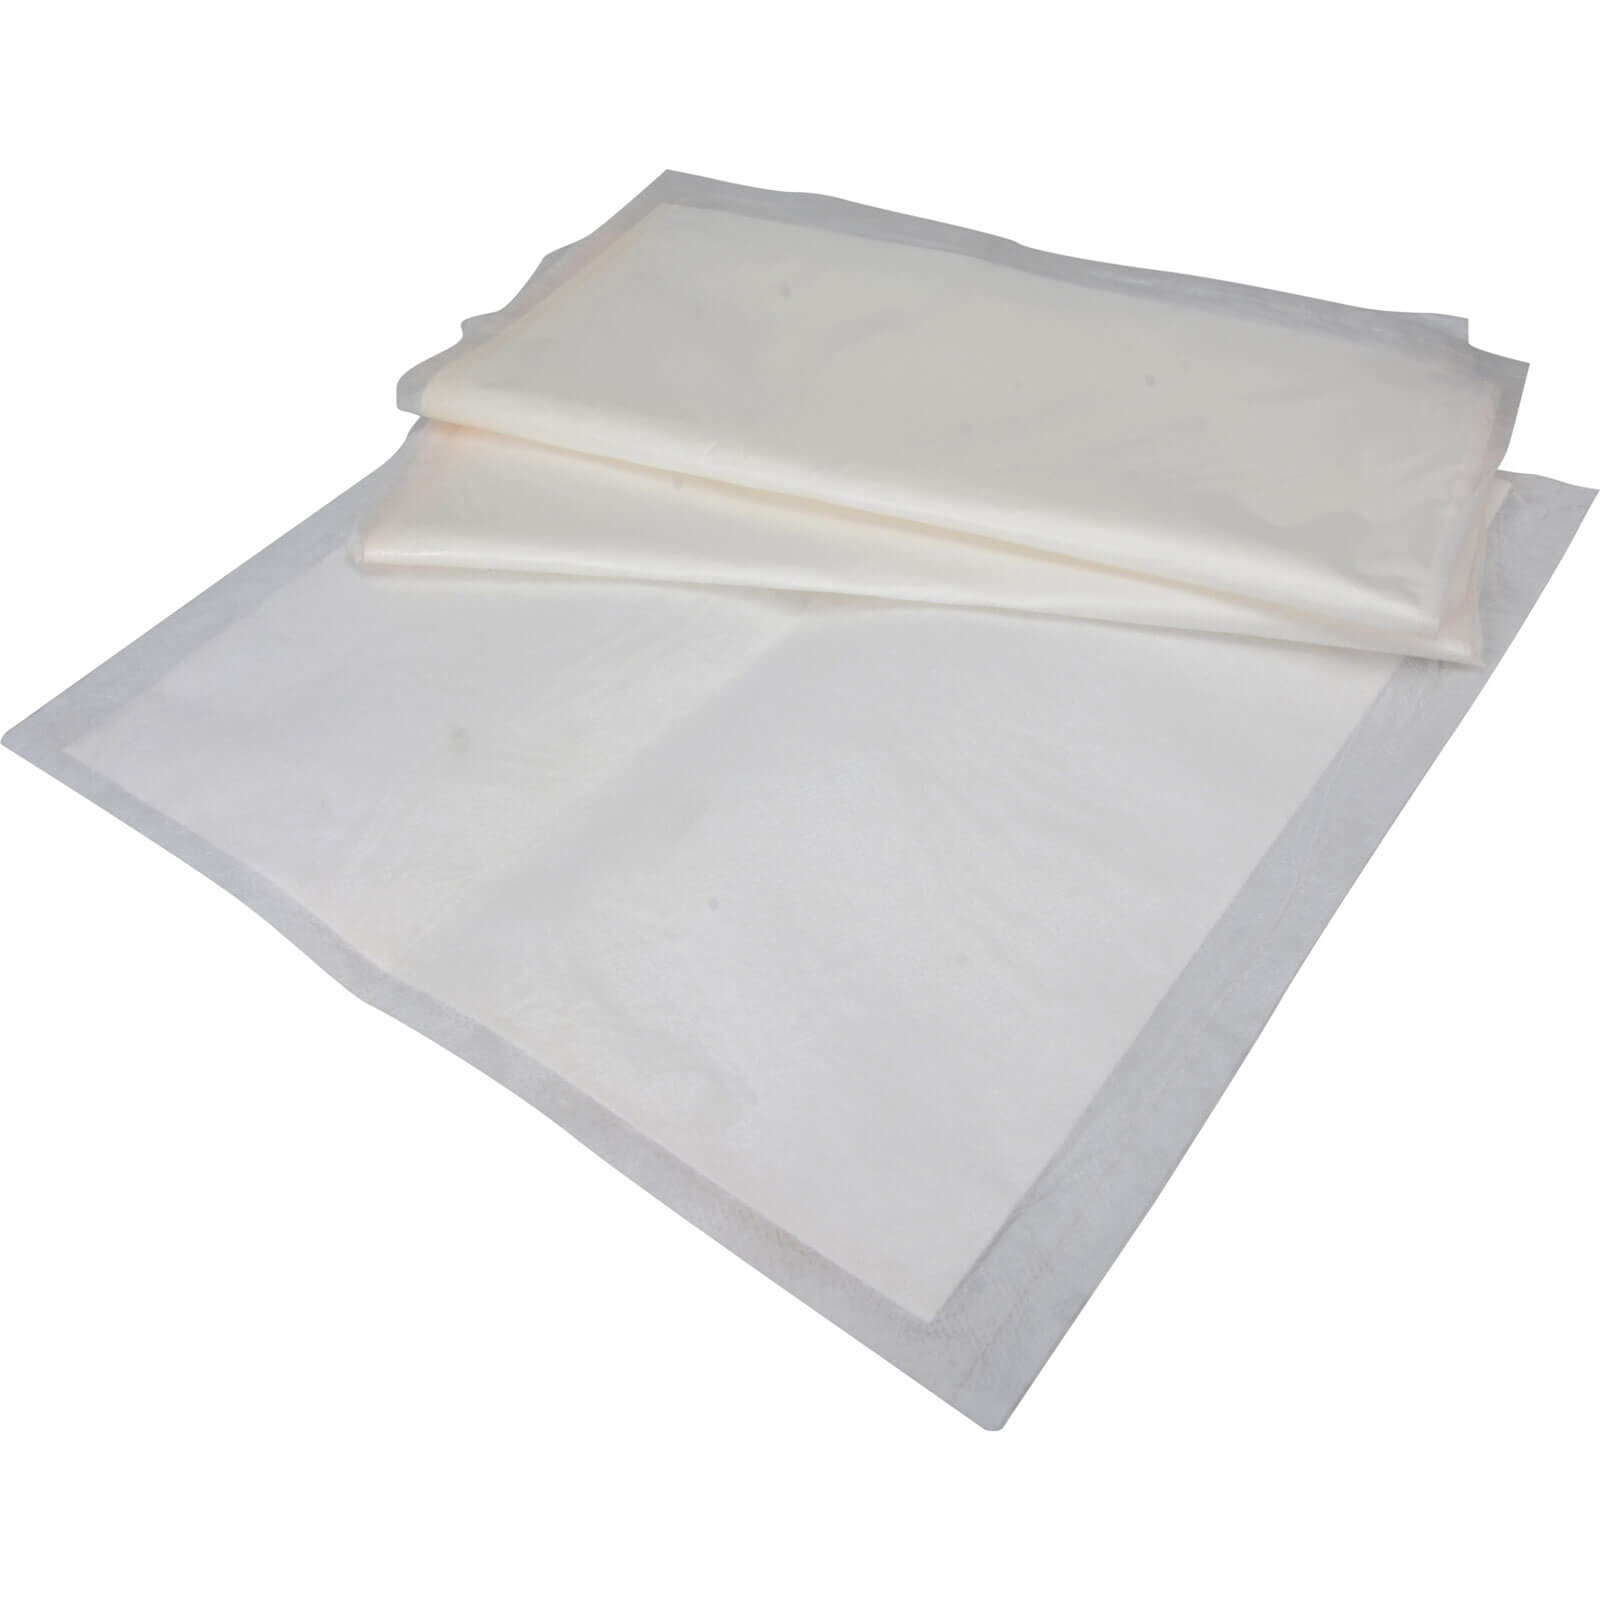 Photo of Monument 2951y Mopitup Super Absorbent Sheets Pack Of 3